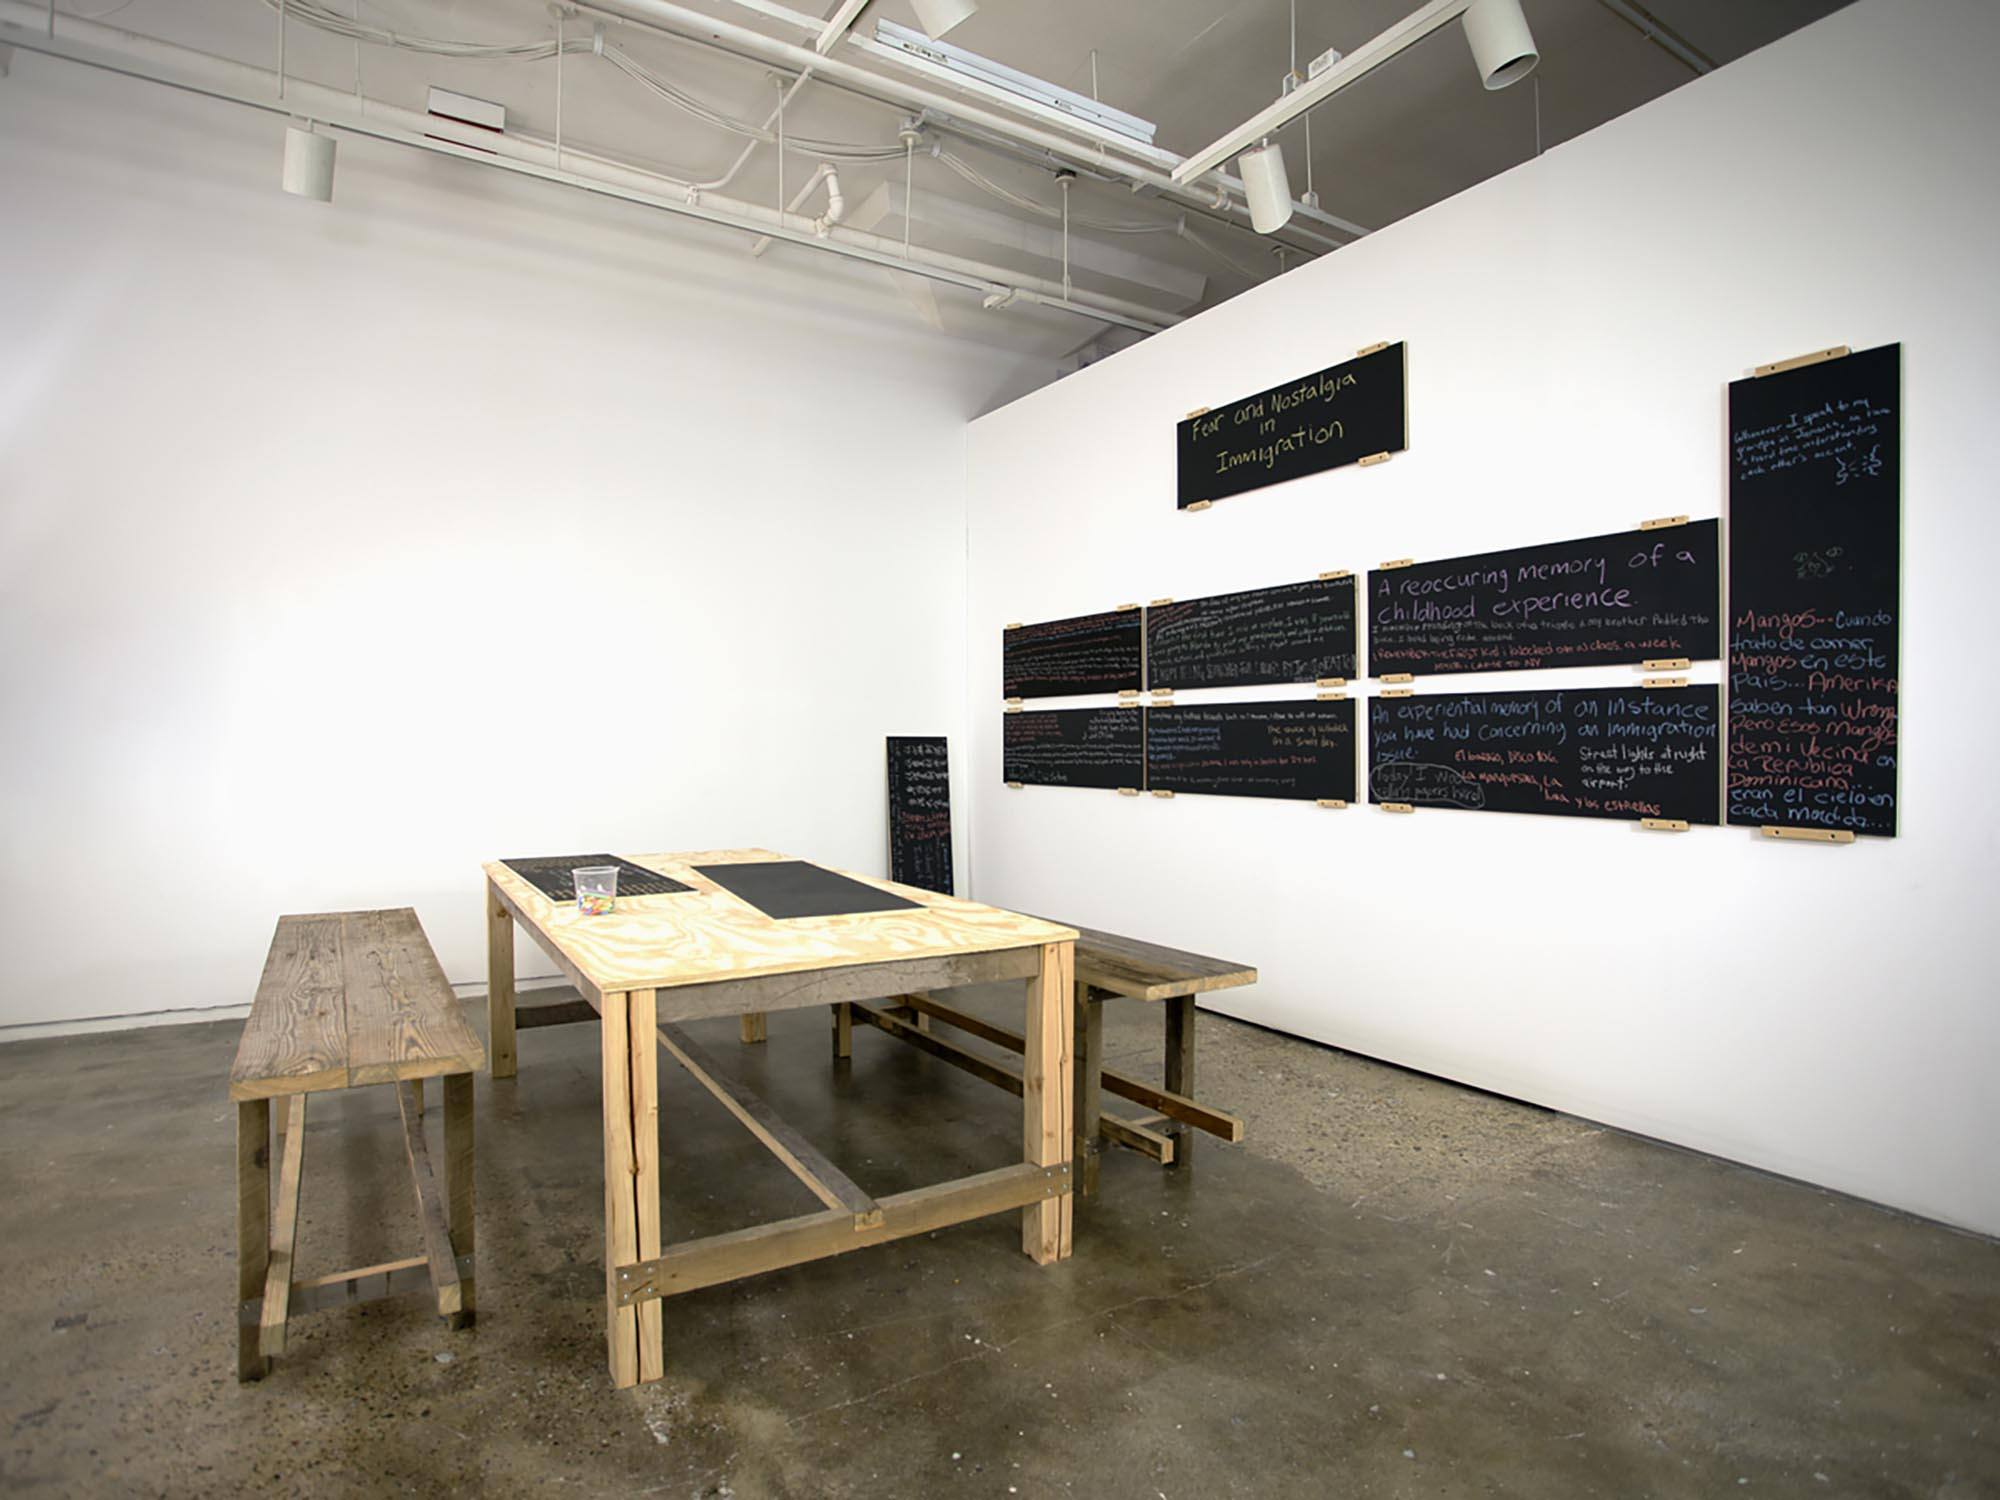 A gallery space with a wooden table and benches and chalkboards on the wall